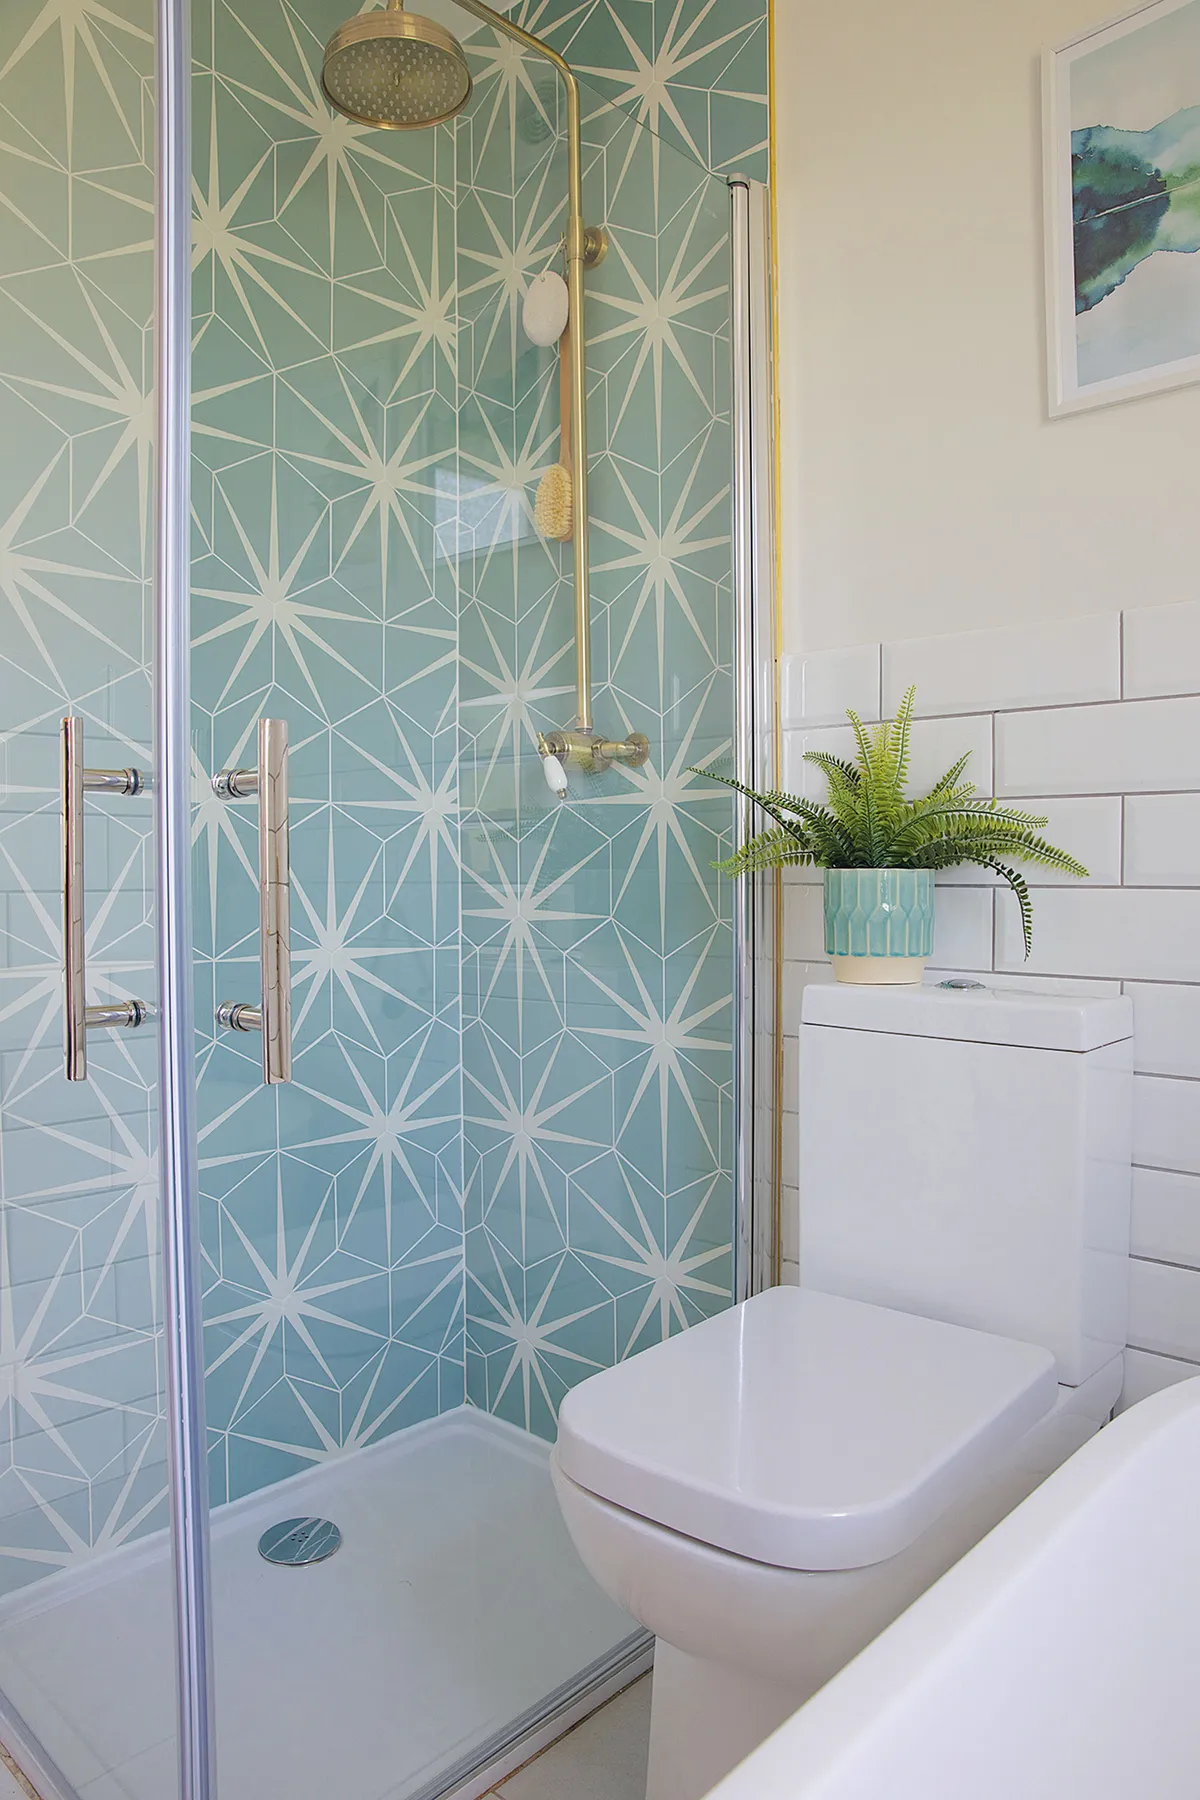 ‘Although I’ve generally tried to keep costs down by using standard metro tiles on most of the walls, the Lily Pad shower tiles from Ca’ Pietra were my little bit of luxury,’ says Laura. ‘They really make a statement and work well with the antique bronze shower from House of Enki’